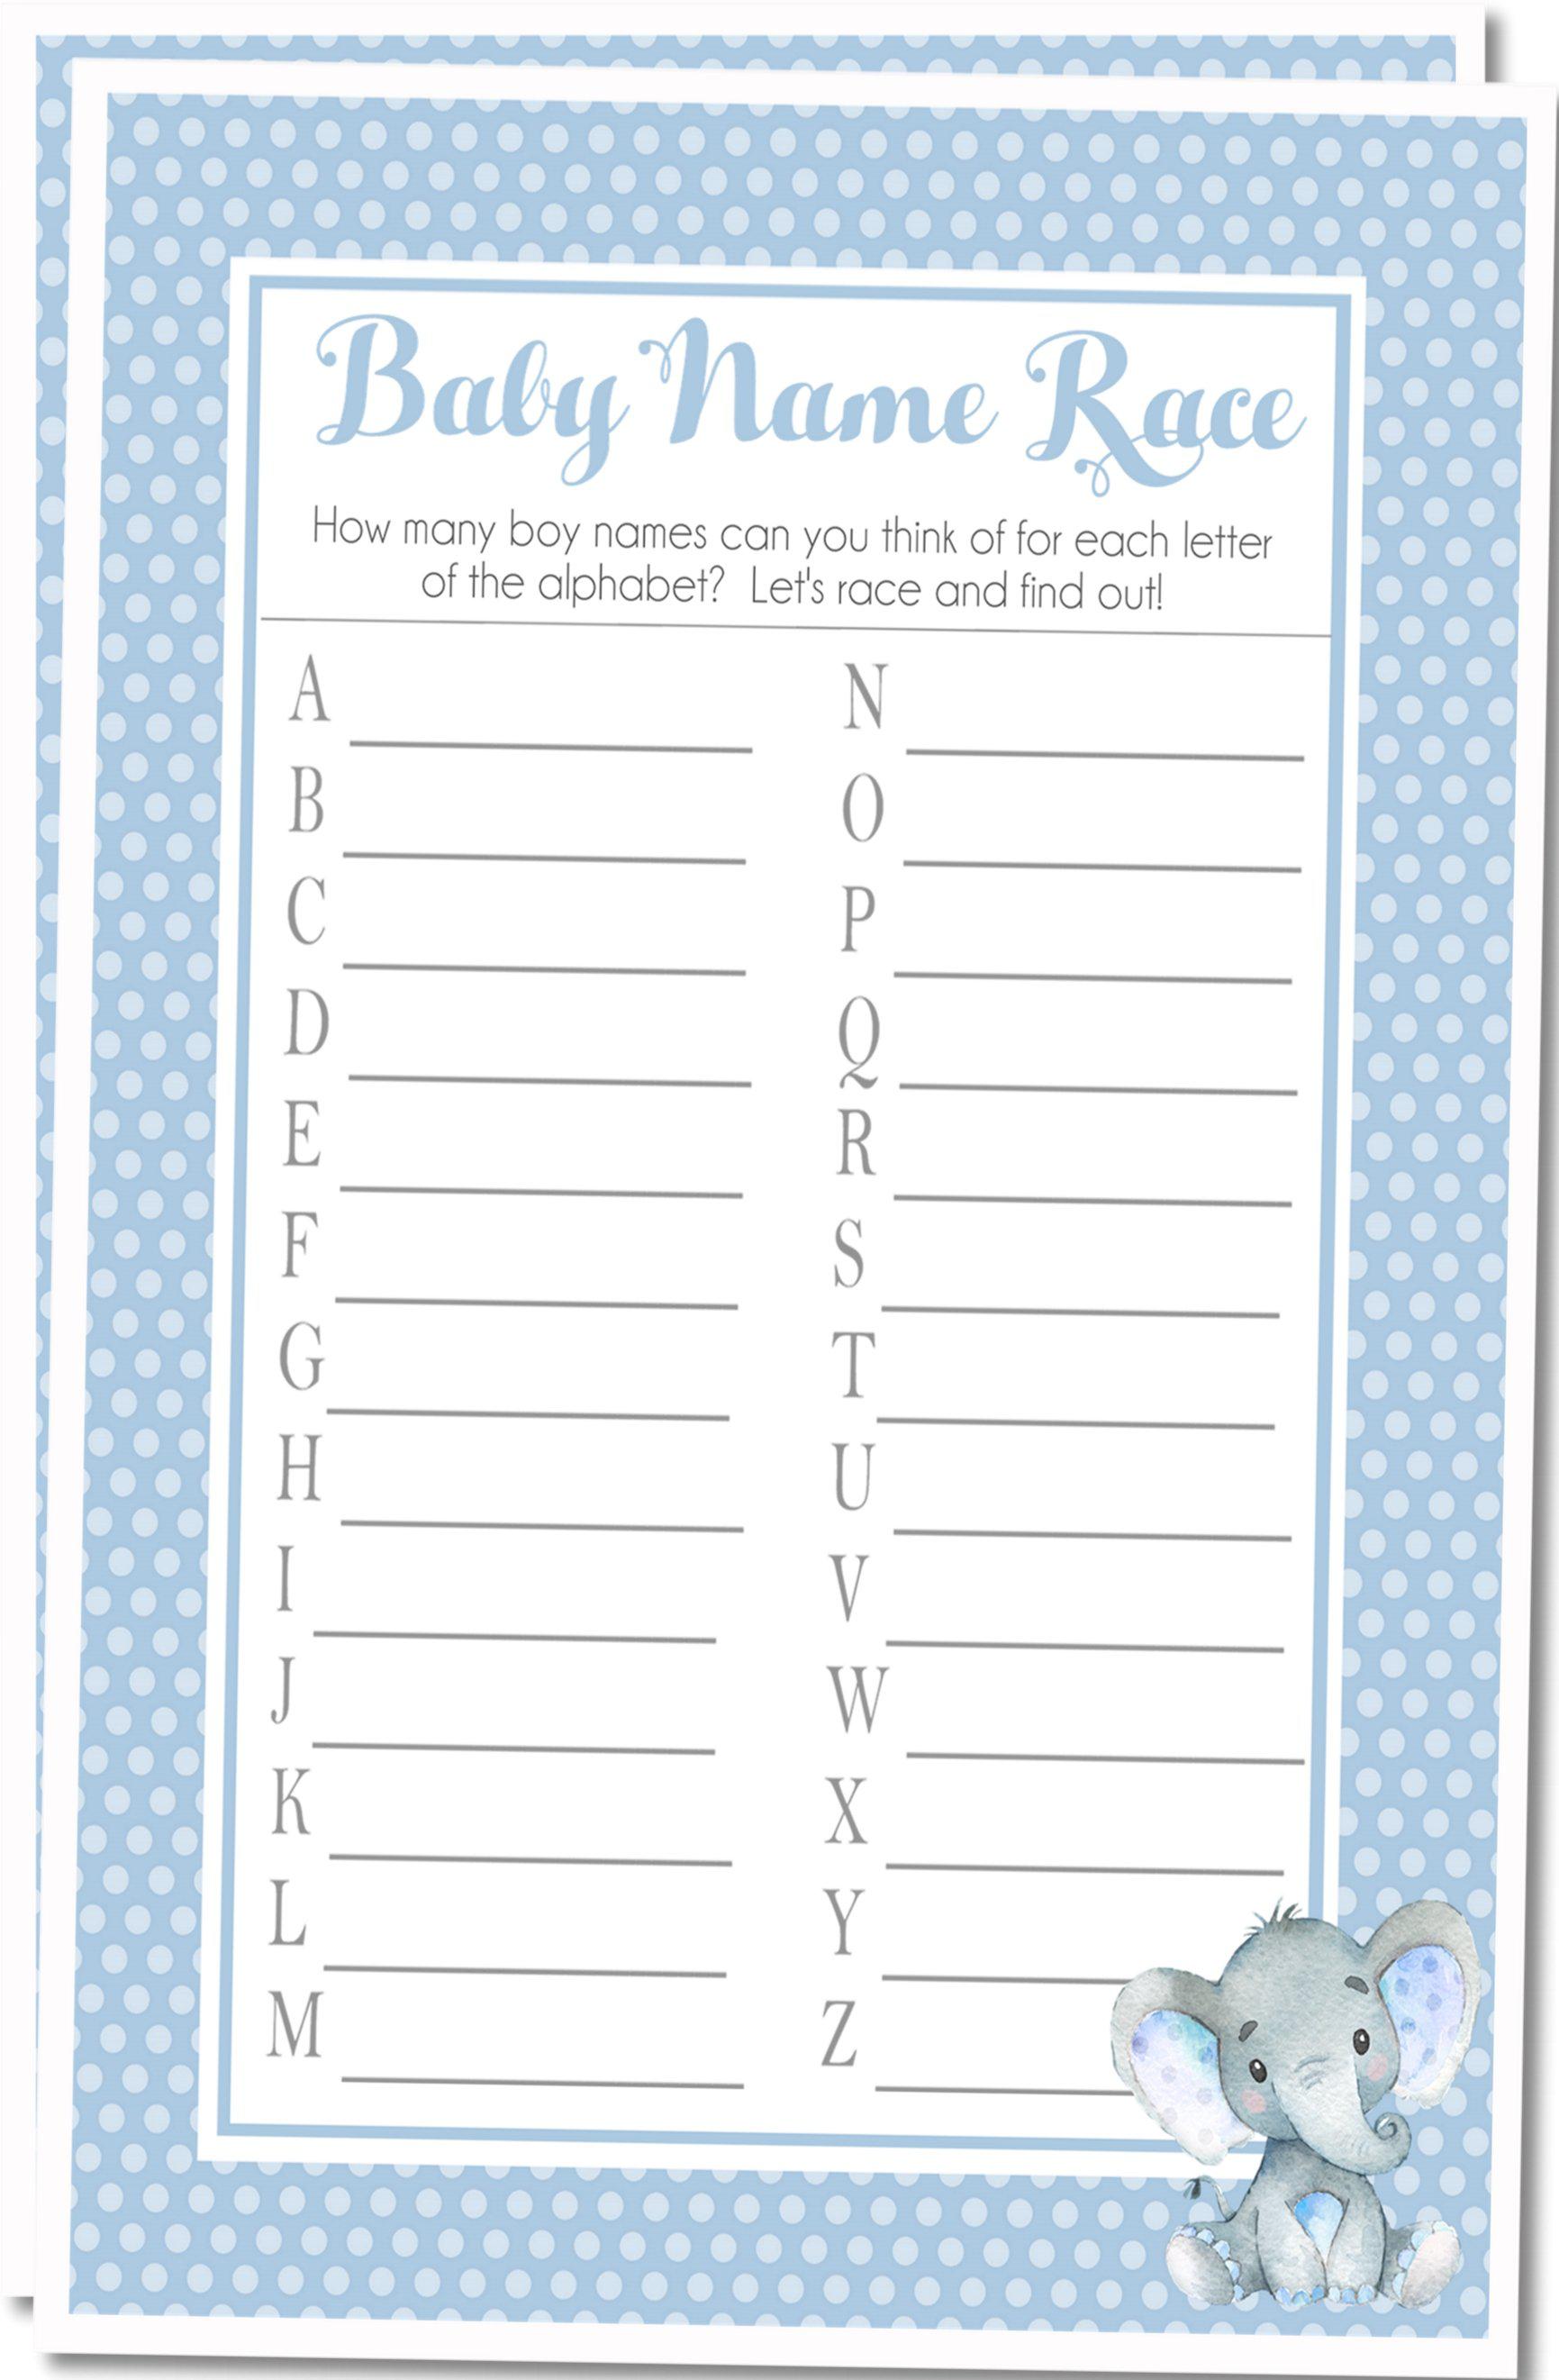 Boys Elephant Baby Shower Name Race Game Cards